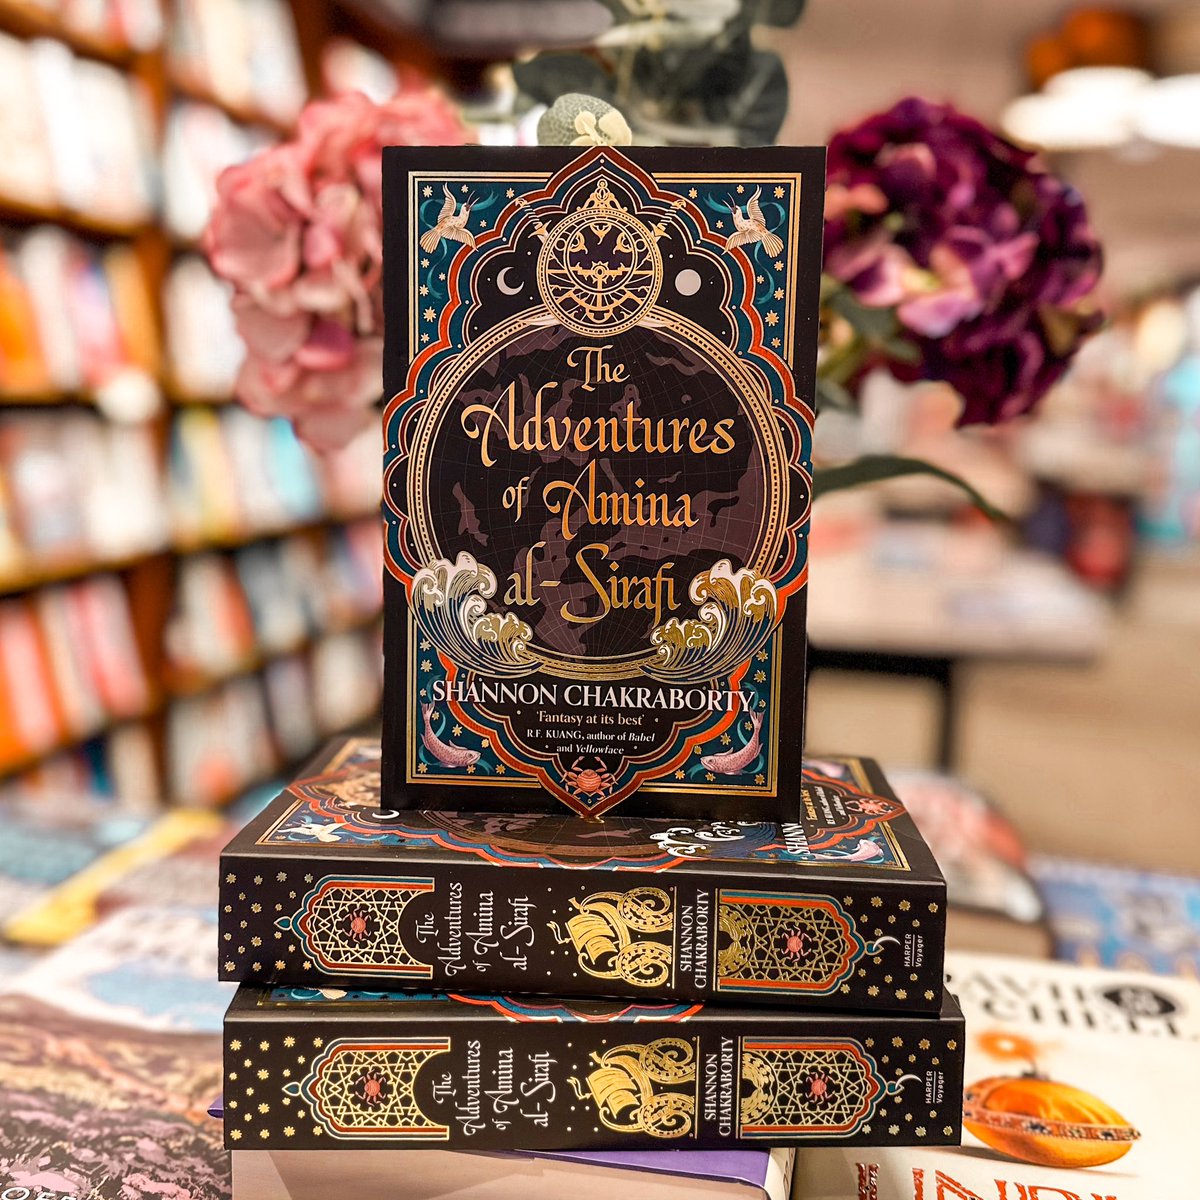 Our Fantasy Book of the Month is The Adventures of Amina al-Sirafi! 🏴‍☠️✨

A retired female pirate takes on one final adventure in this swashbuckling opening to a new fantastical series!

#northallerton #lovenorthallerton #shannonchakraborty #theadventuresofaminaalsirafi